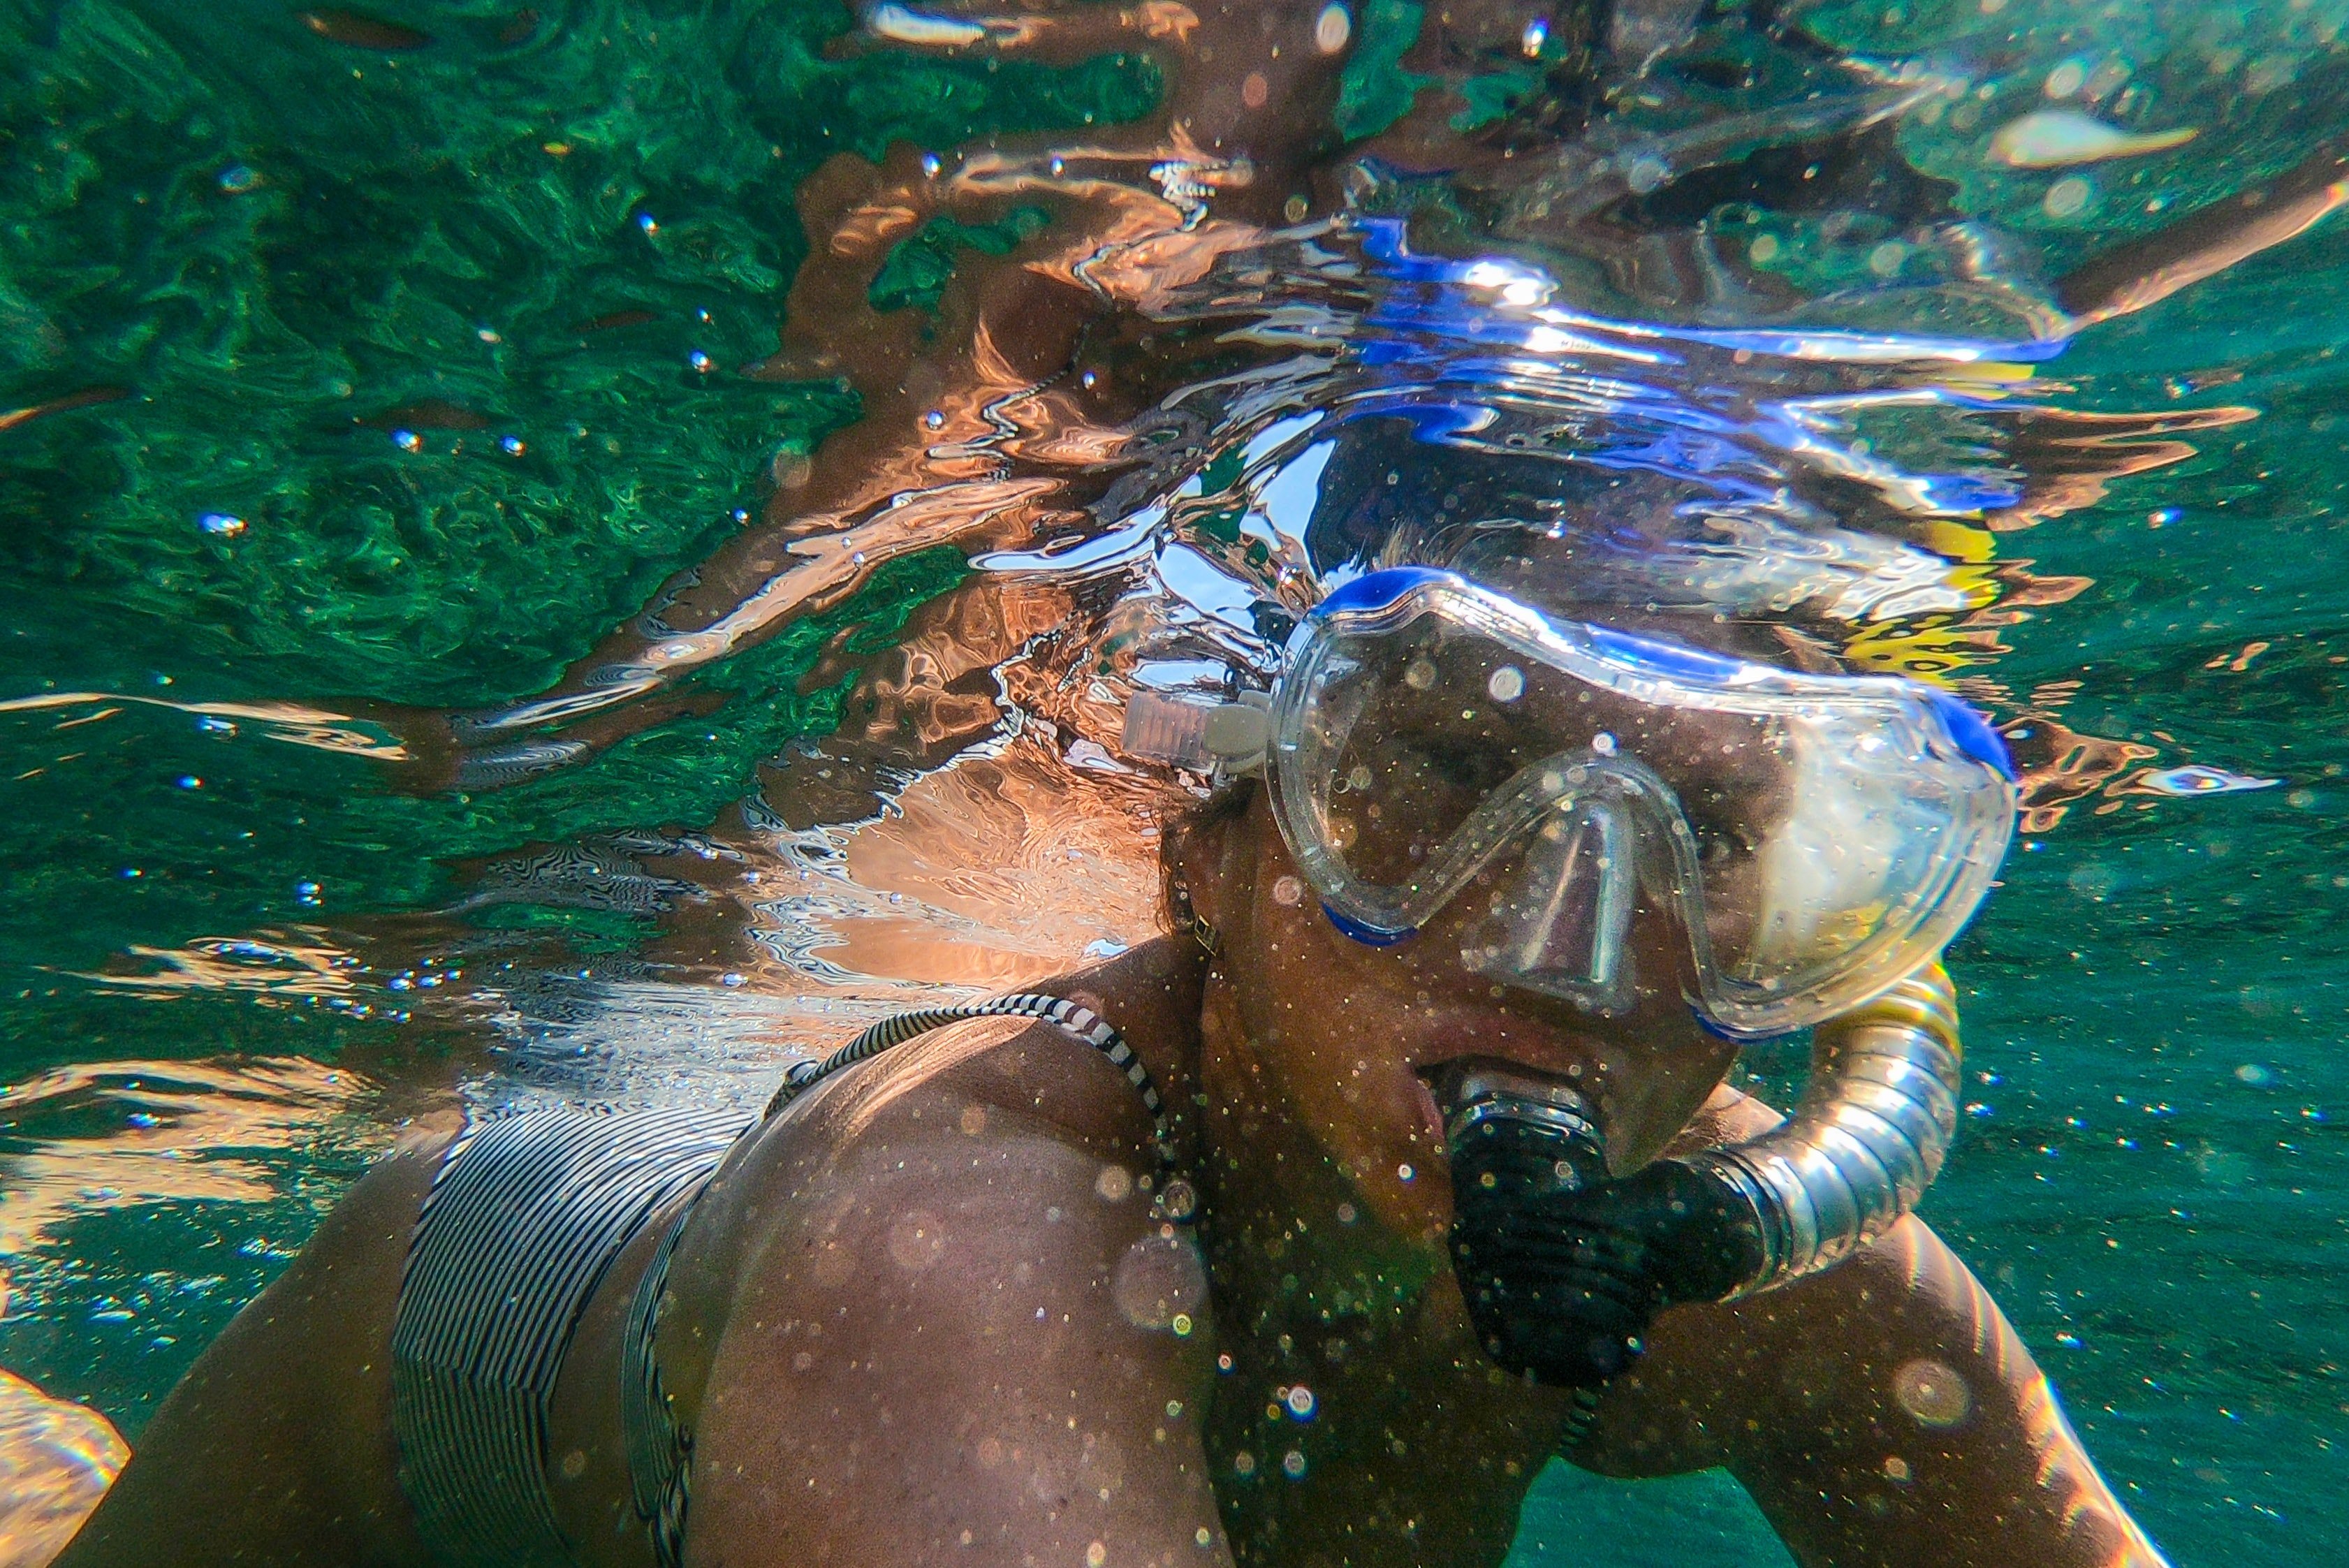 Pictured - A woman underwater wearing goggles and snorkel | Source: Pexels 